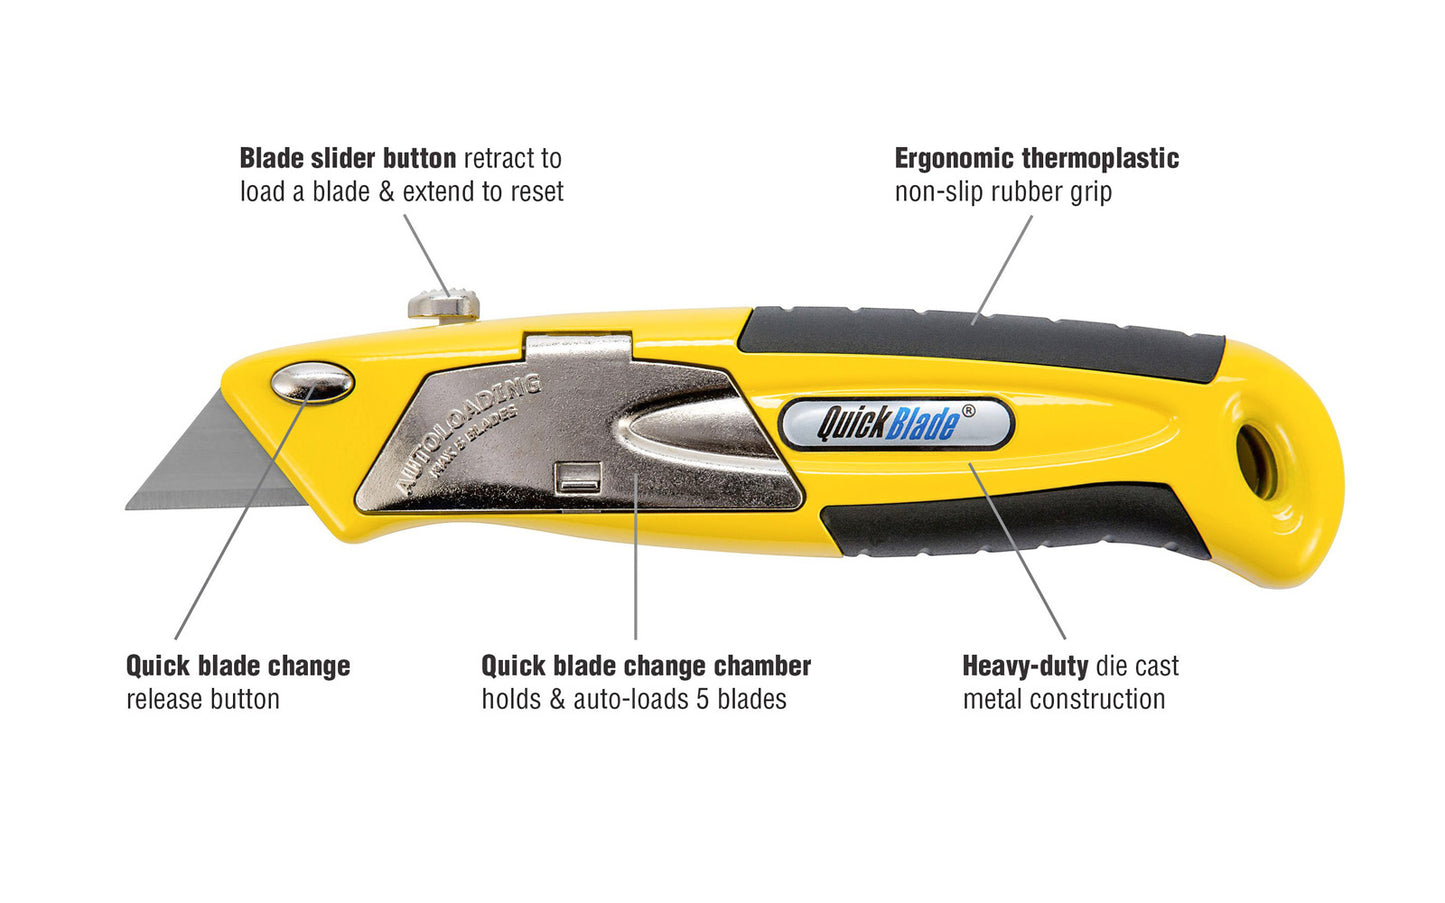 This Auto-Loading Metal Utility Knife has an unique auto-loading design & sturdy construction. Features a one-button automatic blade change that comes pre-loaded with five additional blades which can be easily engaged at anytime. Retractable knife. 073441003756. Model QBA-375 knife. PHC - Pacific Handy Cutter.